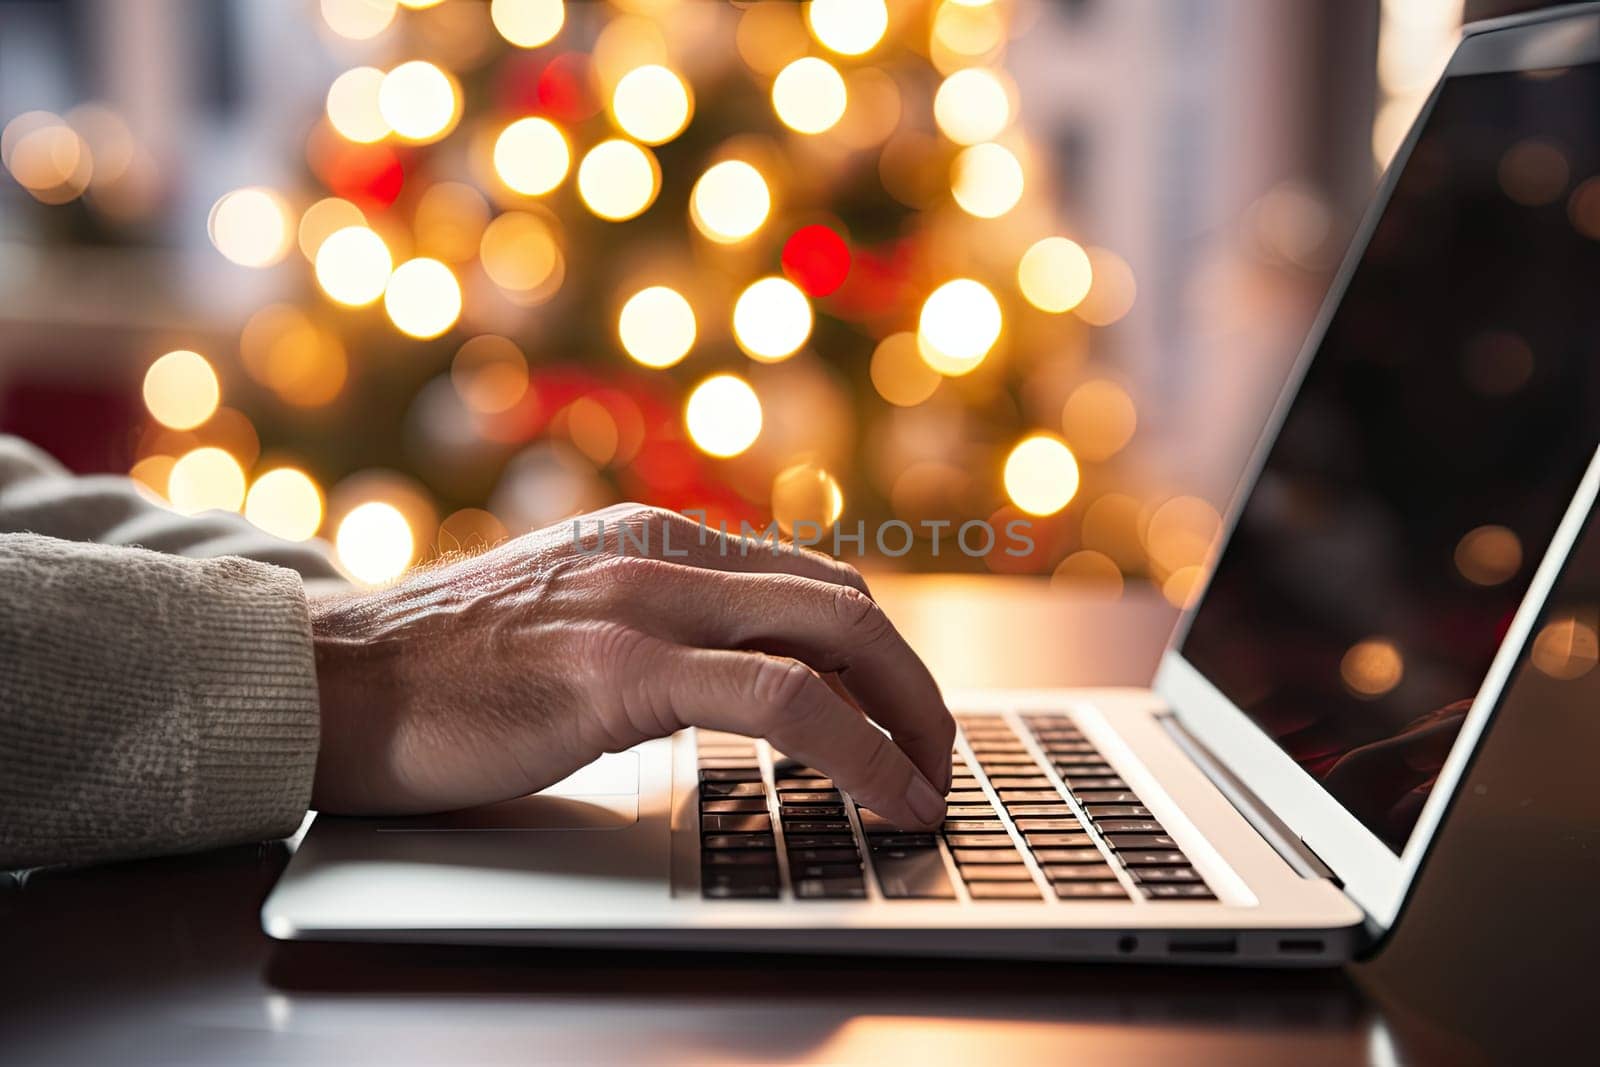 someone's hands typing on a laptop in front of a christmas tree with lights behind it and a blured background